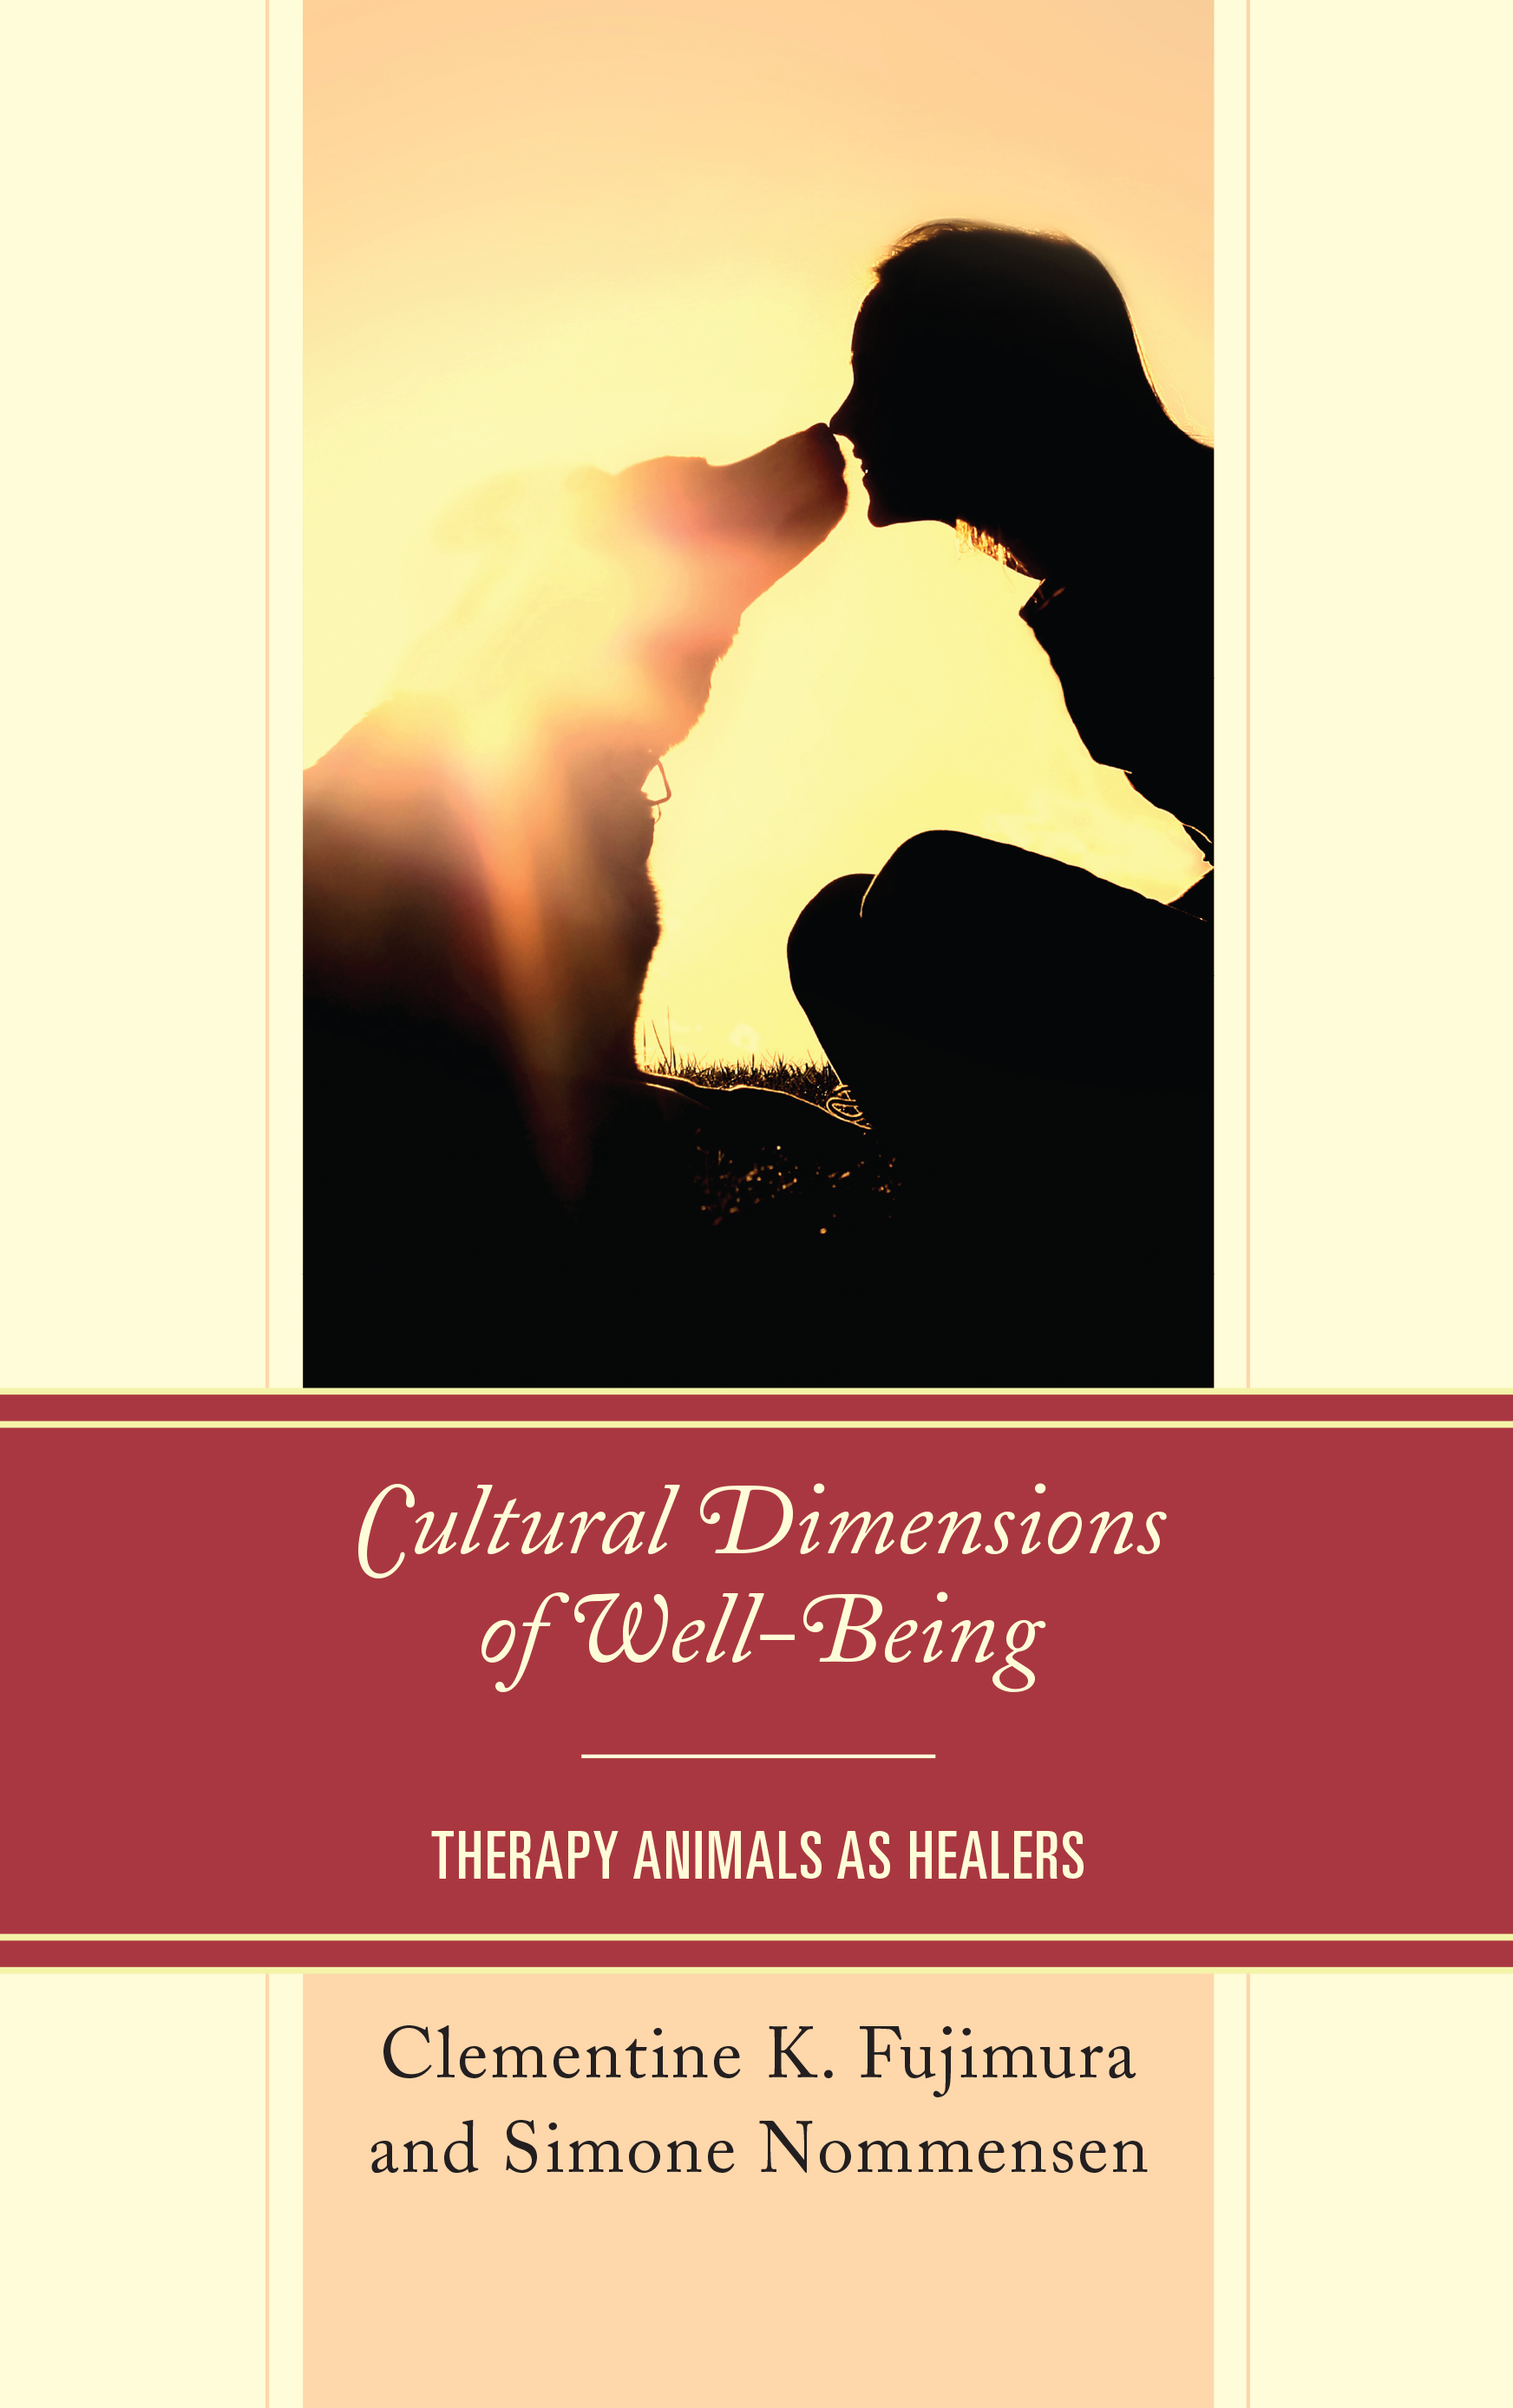 Cultural Dimensions of Well-Being: Therapy Animals as Healers